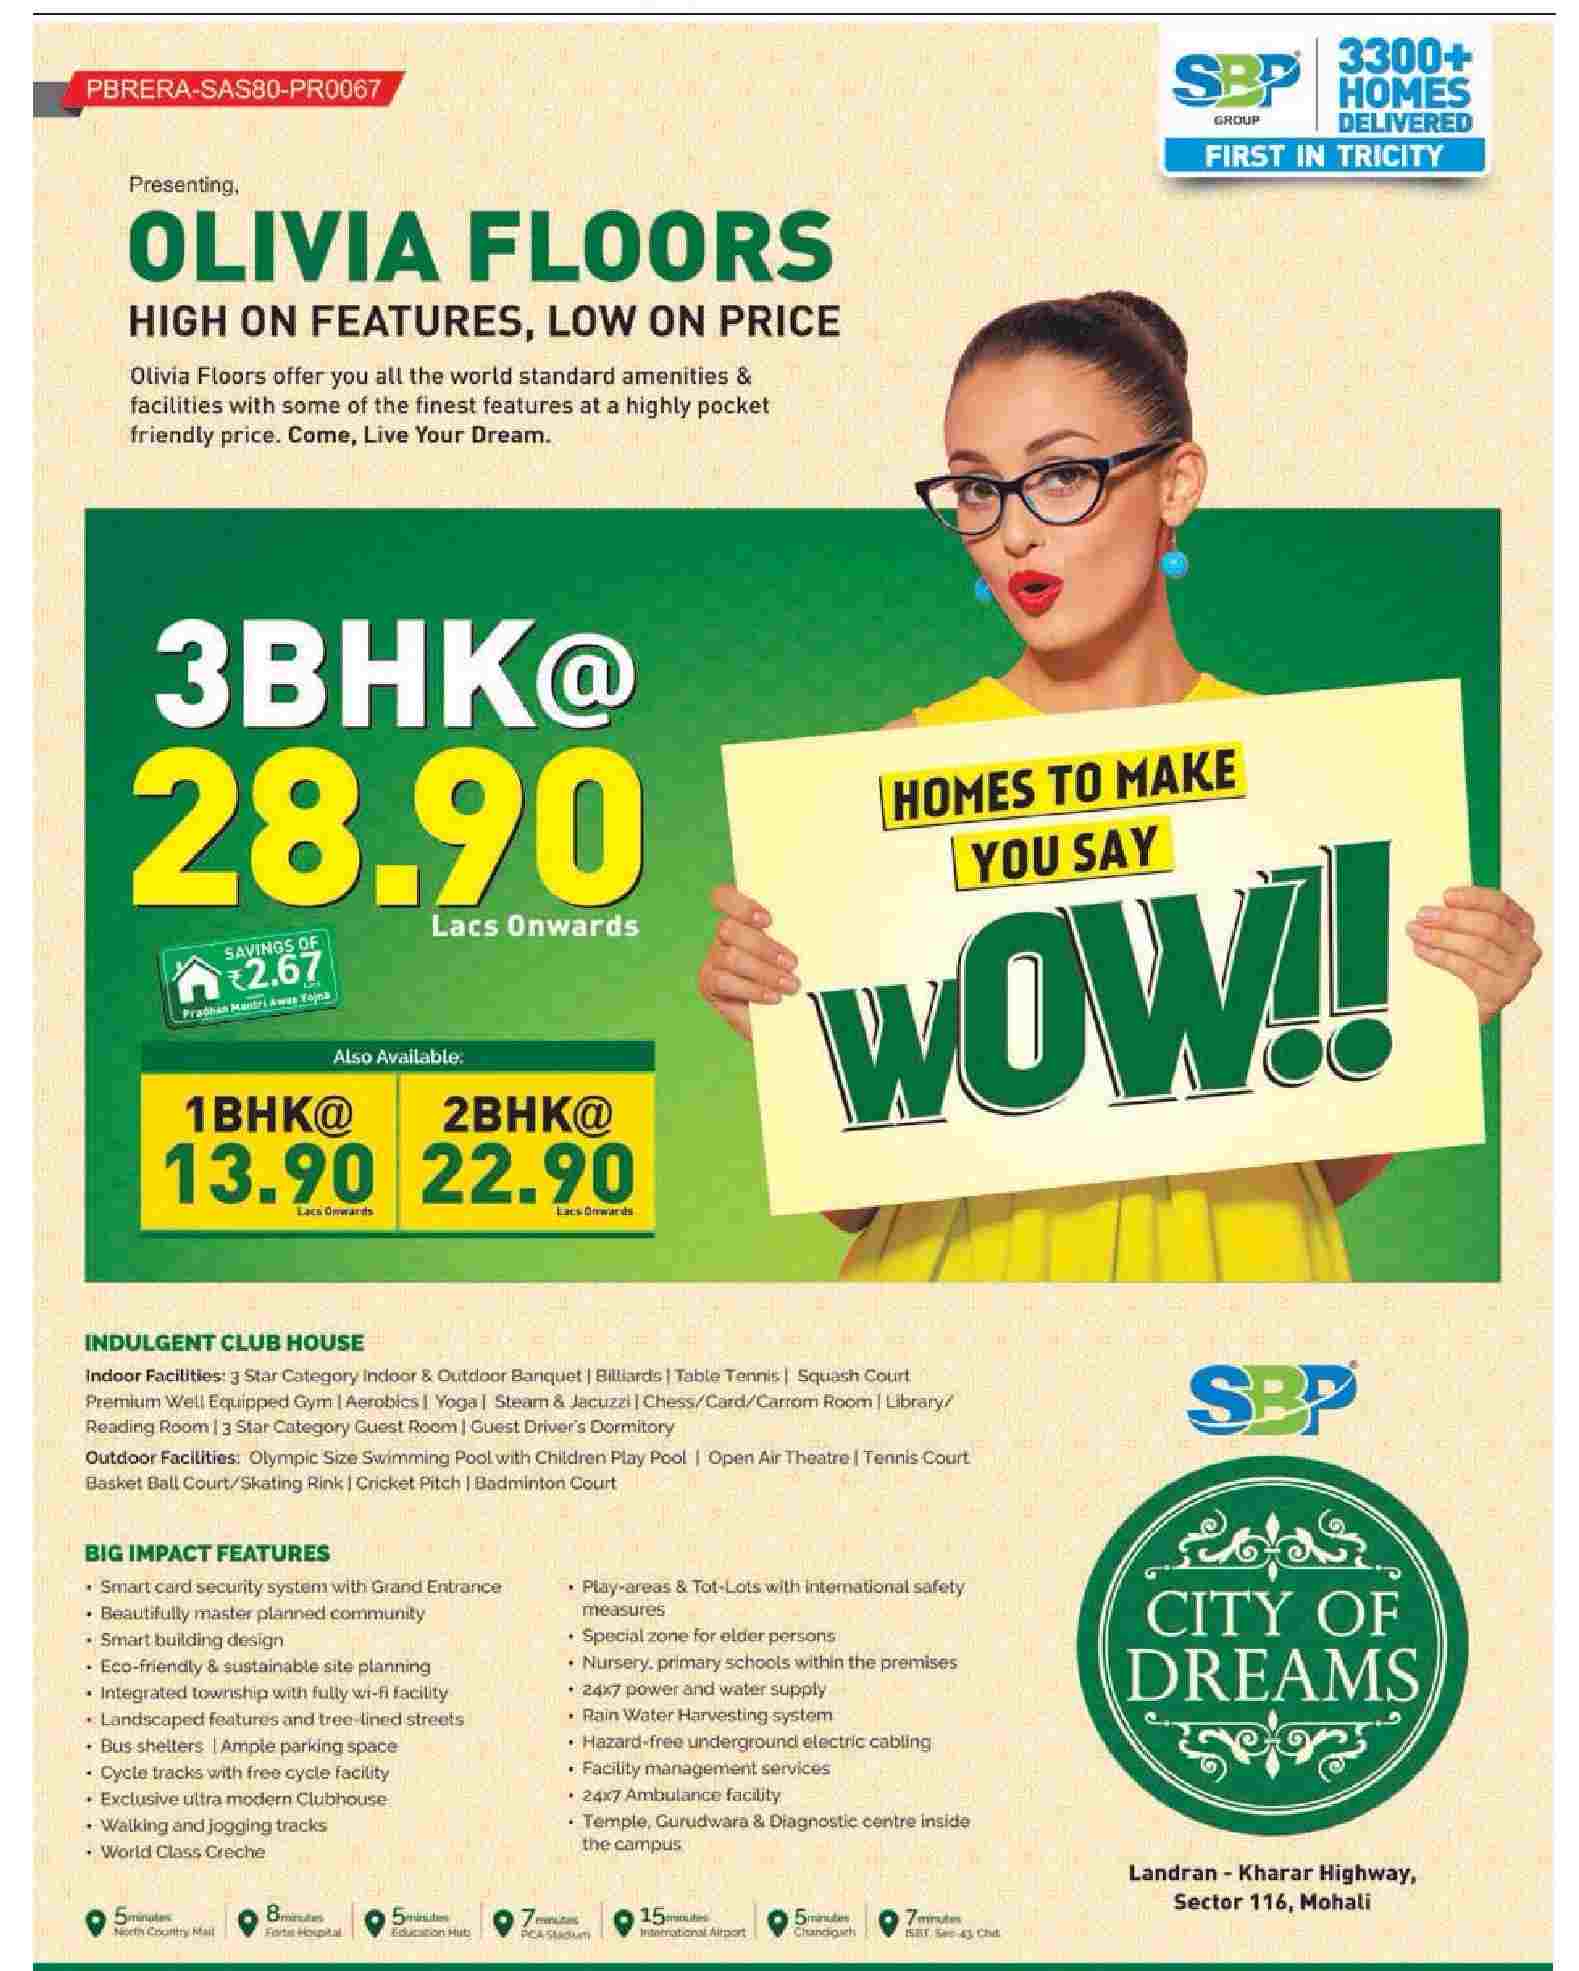 SBP presenting Olivia Floors with high features and low price at City Of dreams in Mohali Update